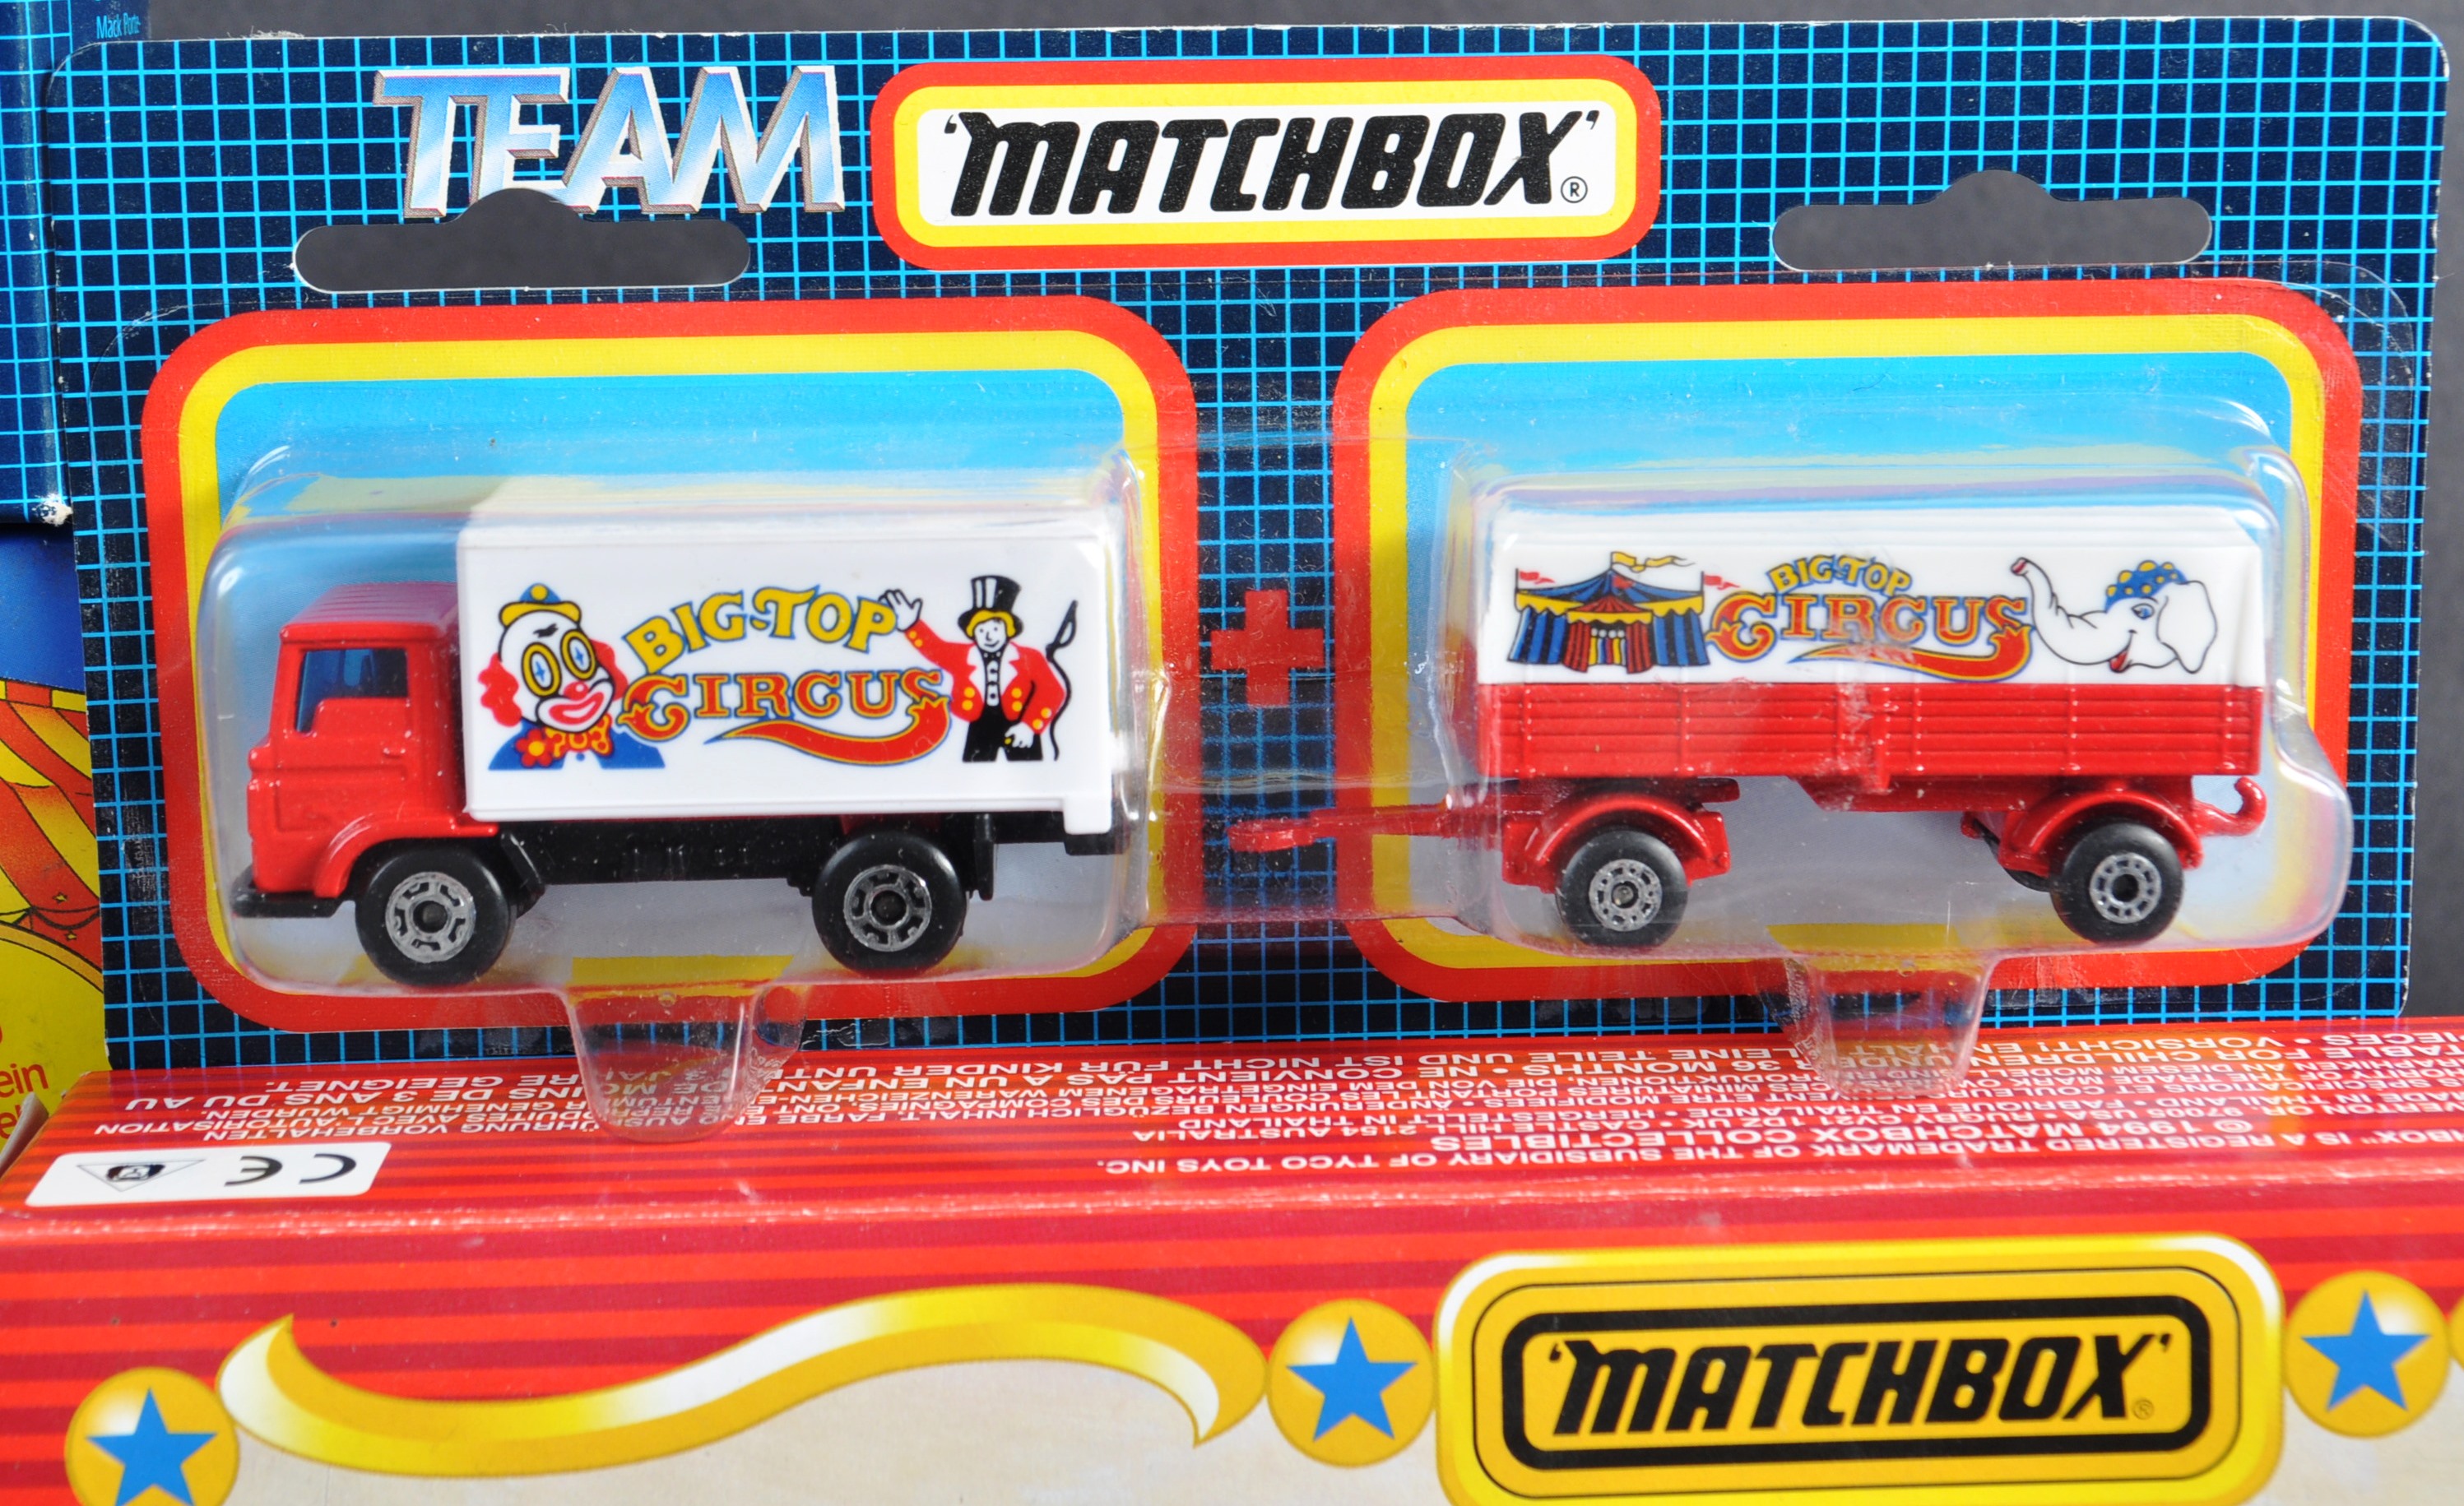 COLLECTION OF MATCHBOX CIRCUS RELATED DIECAST MODELS - Image 3 of 5